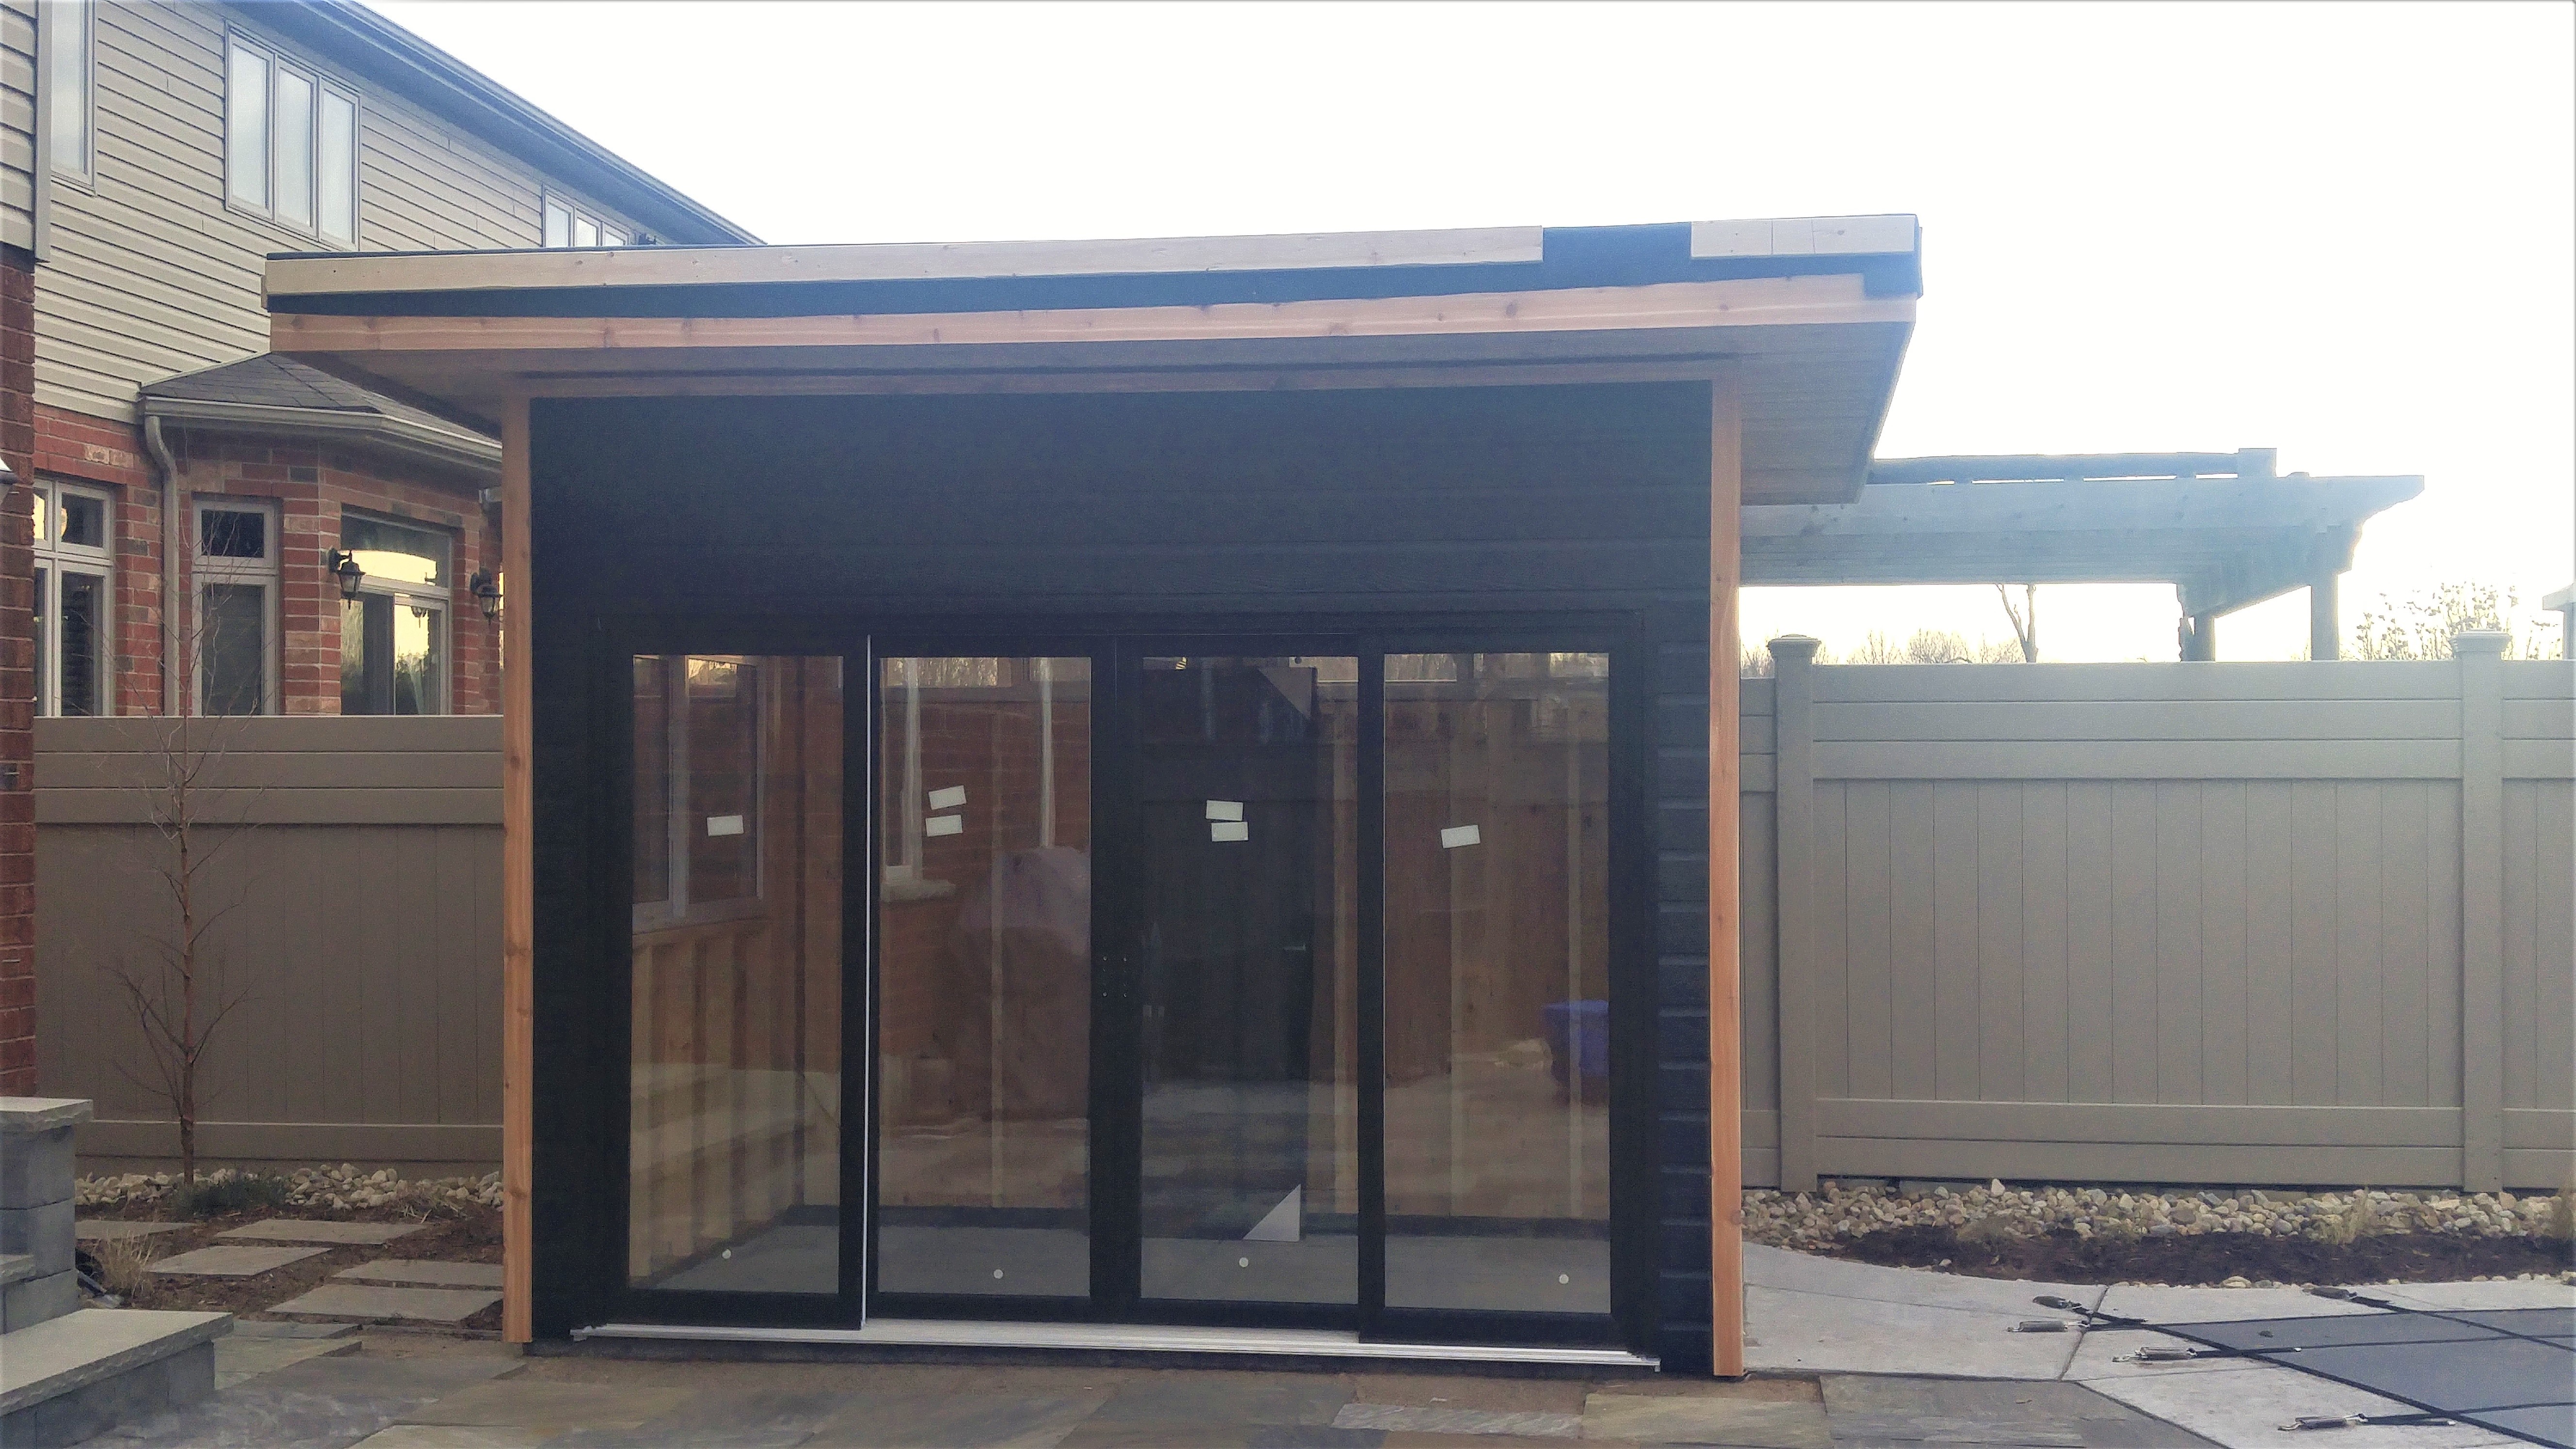 Canexel Verana 8x11 shed kit with Patio Doors in Guelph Ontario. ID number 221370-6